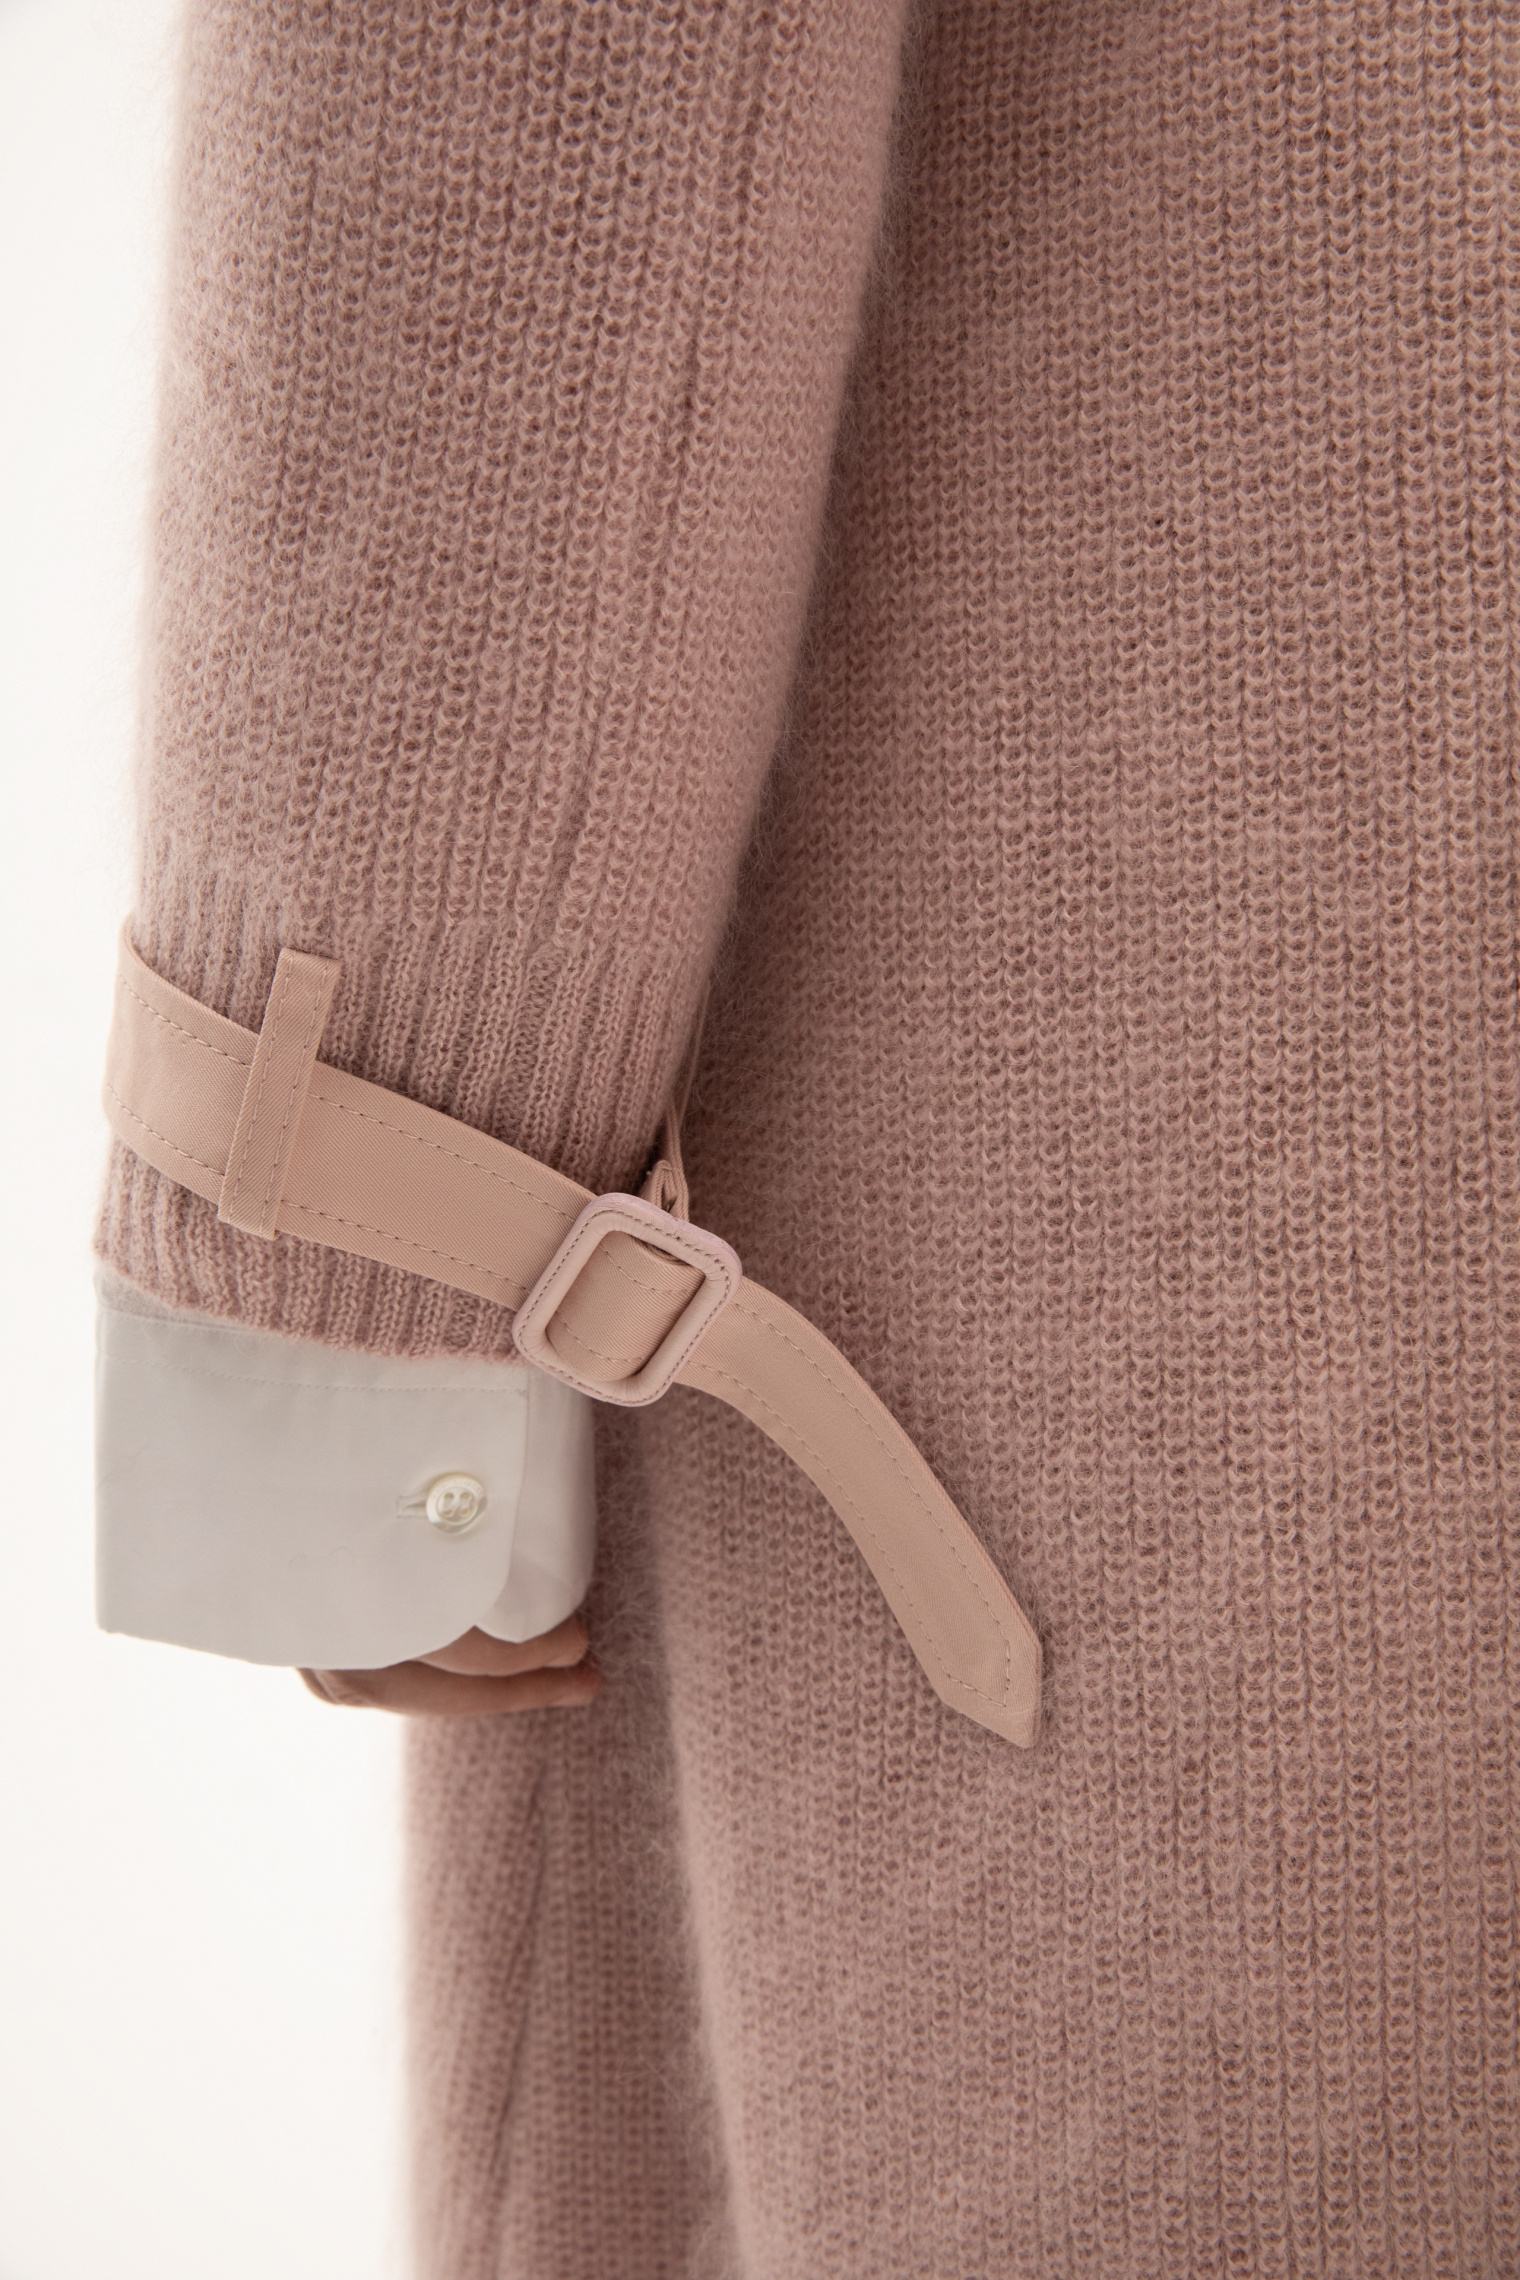 Undercover Partly Knitted Pink Trench